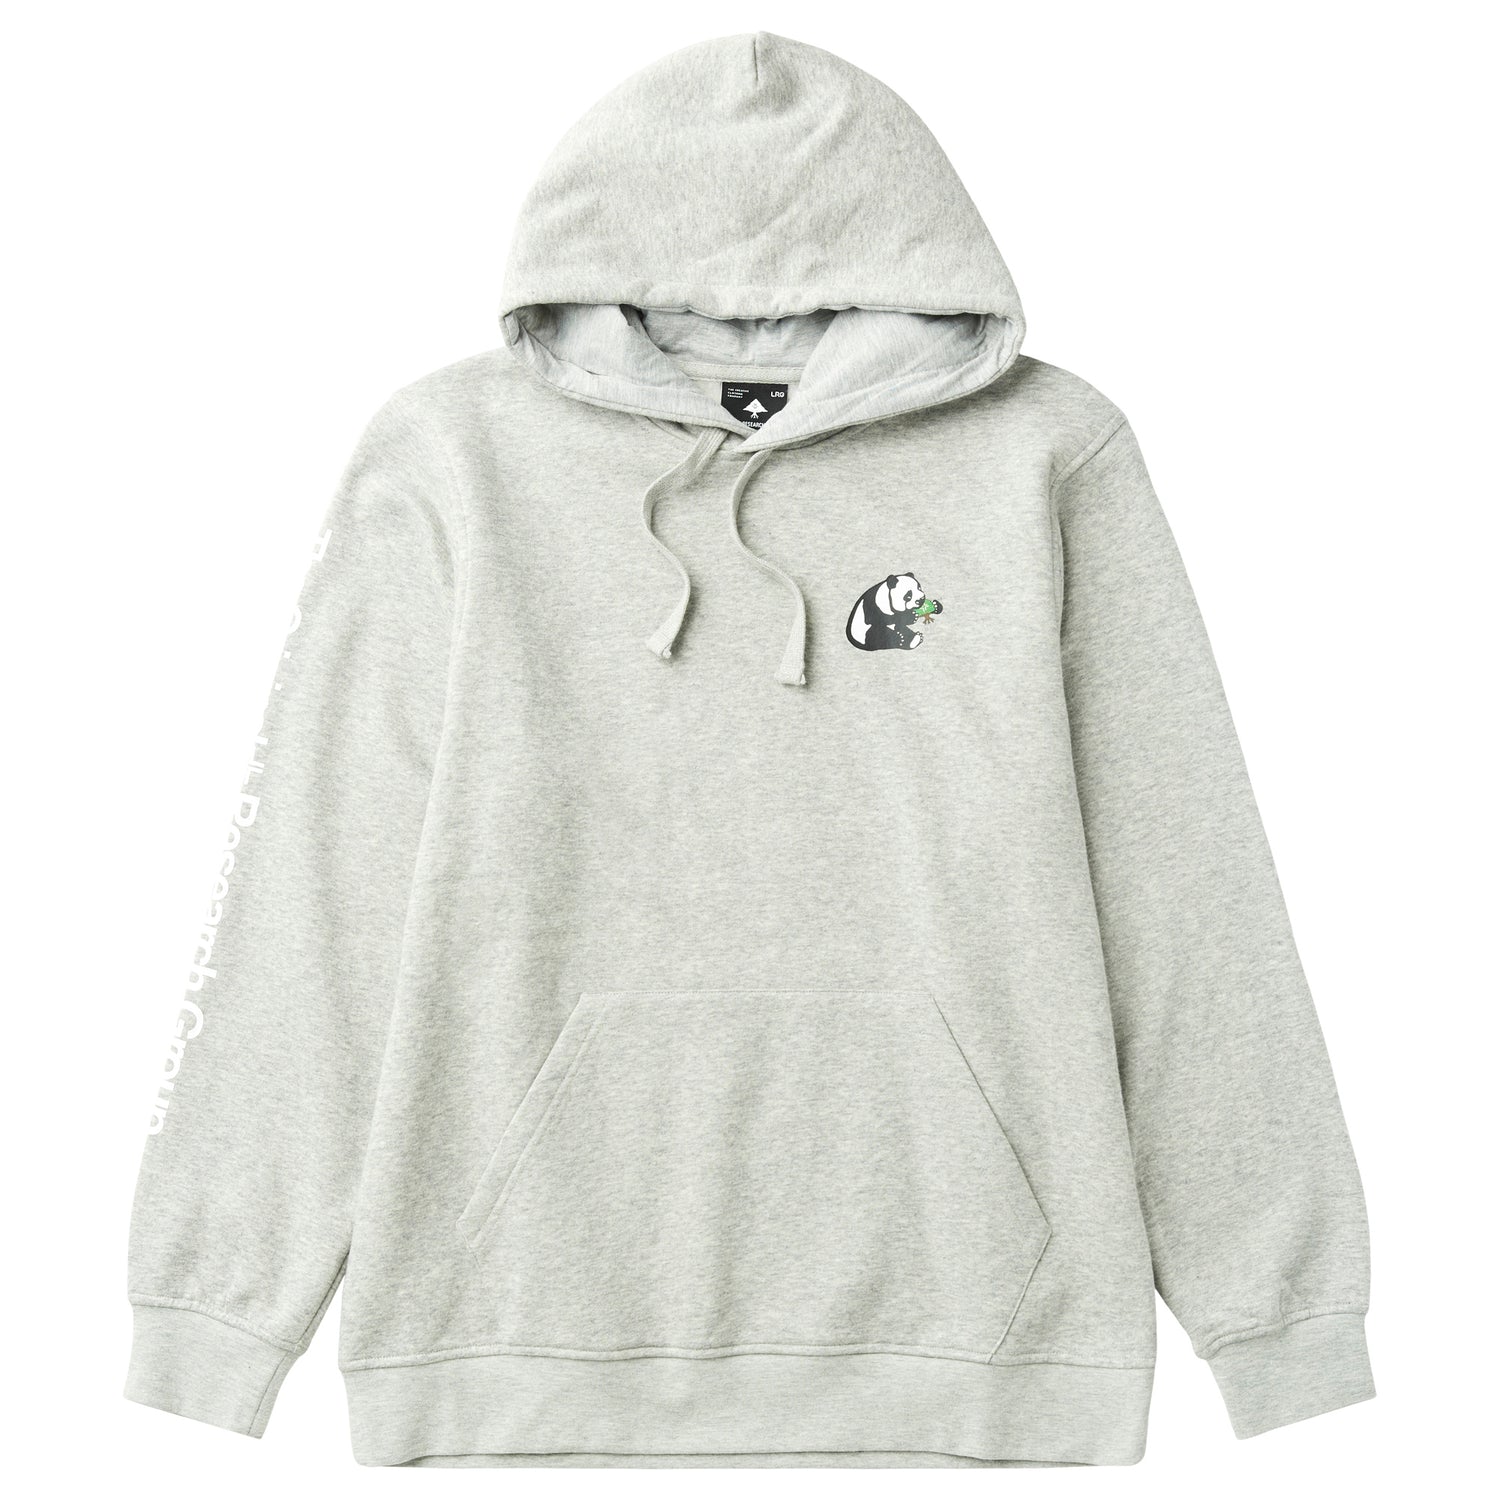 ALWAYS HUNGRY PULLOVER HOODIE - ATHLETIC GRAY